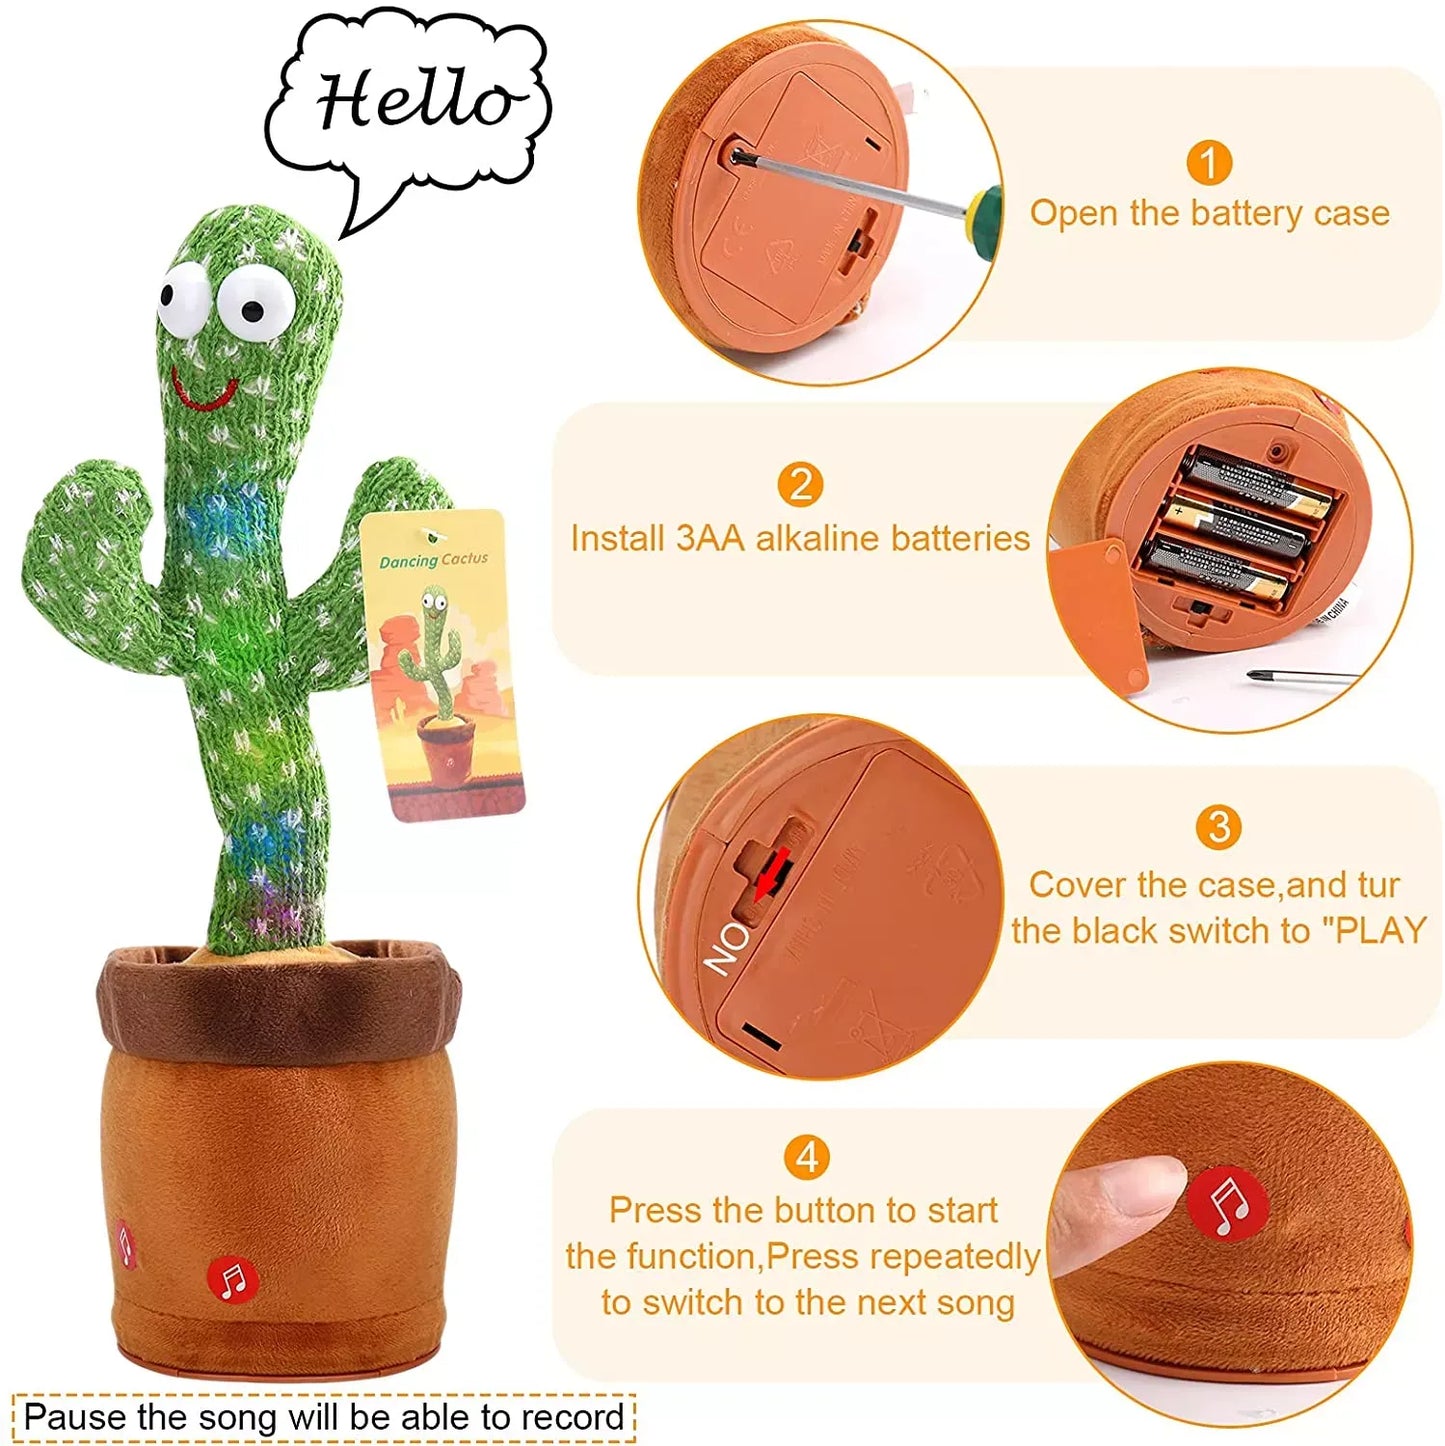 Cactus Dancing Electron Plush Toy - Interactive Singing and Dancing Baby's Birthday Present